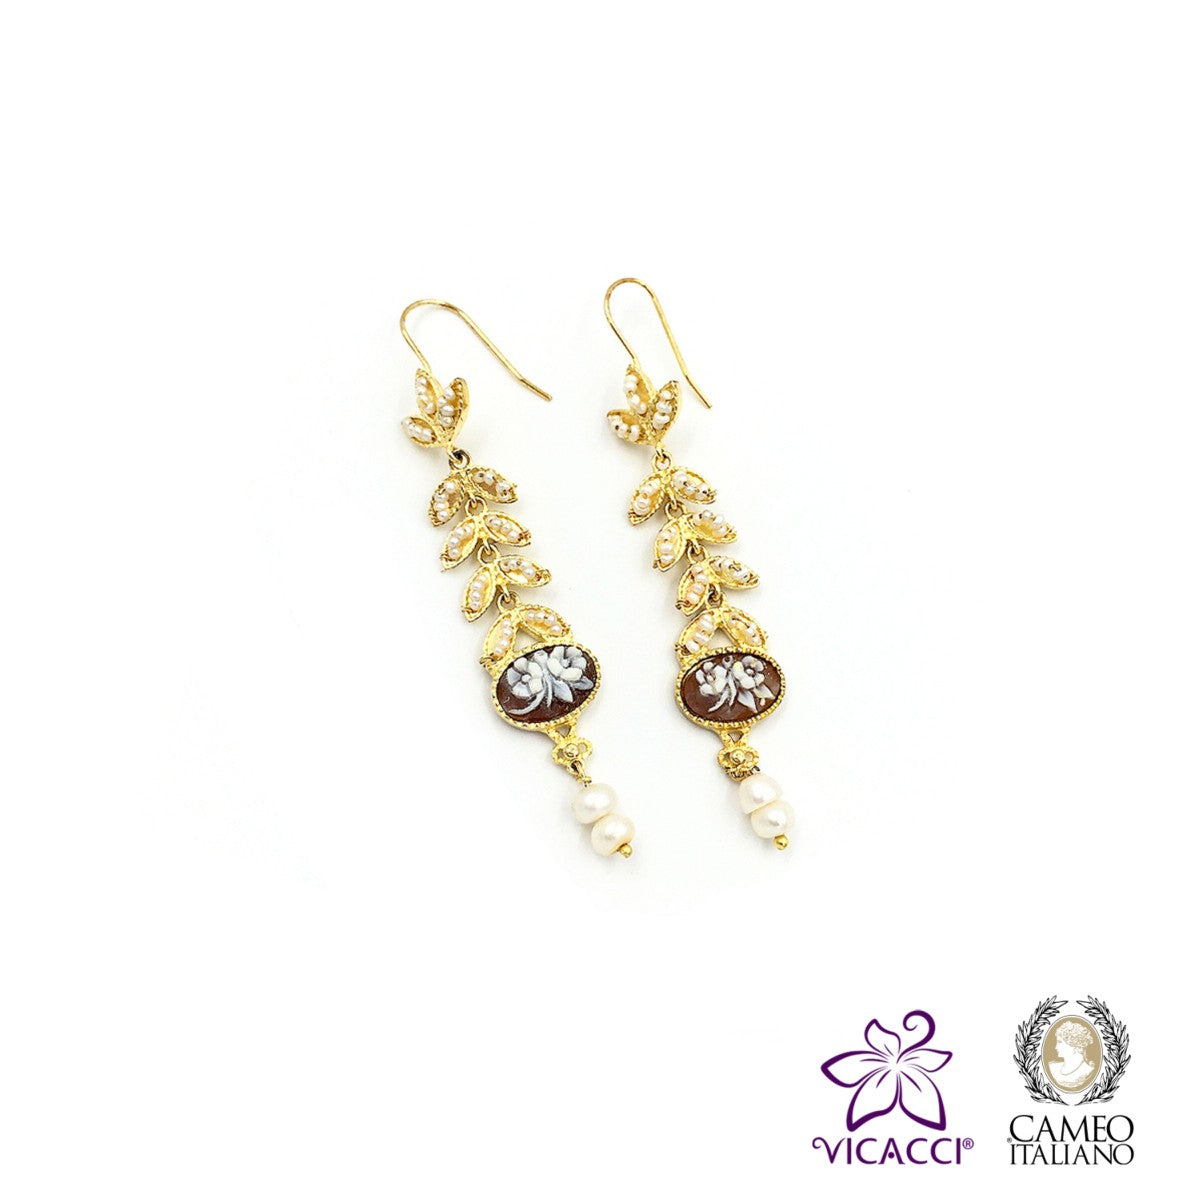 Cameo Italiano, O906 Earrings, 925 Sterling Silver Gold Plated